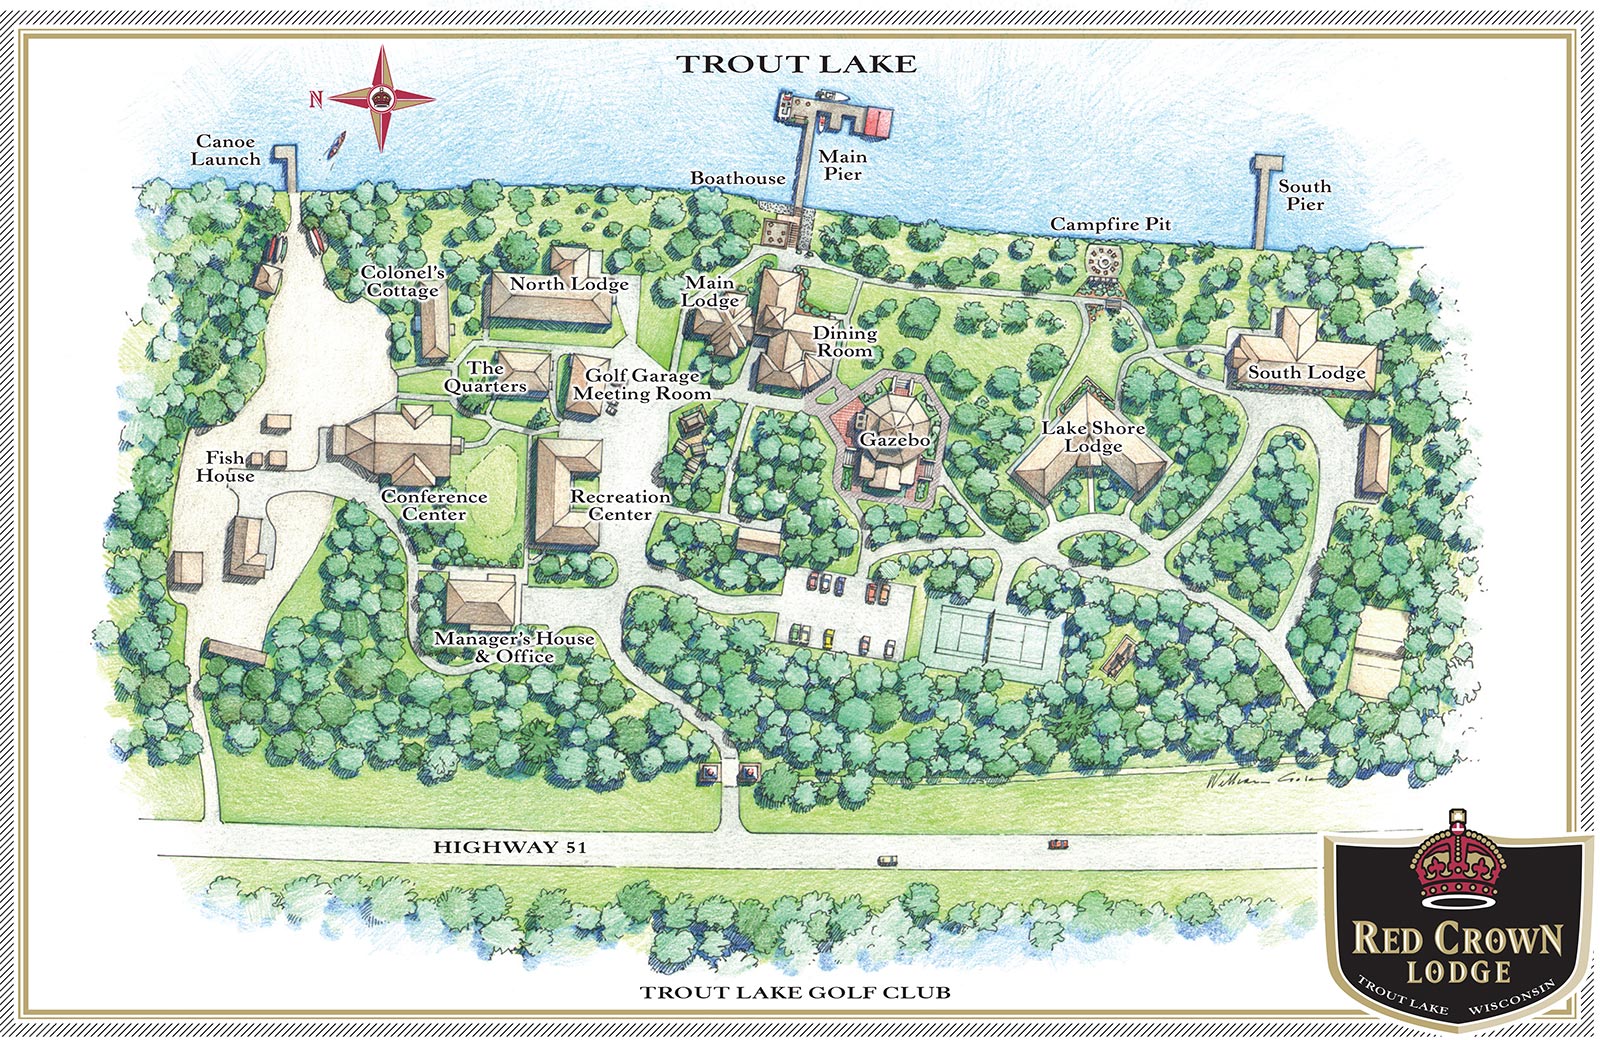 Hand drawn map of Trout Lake